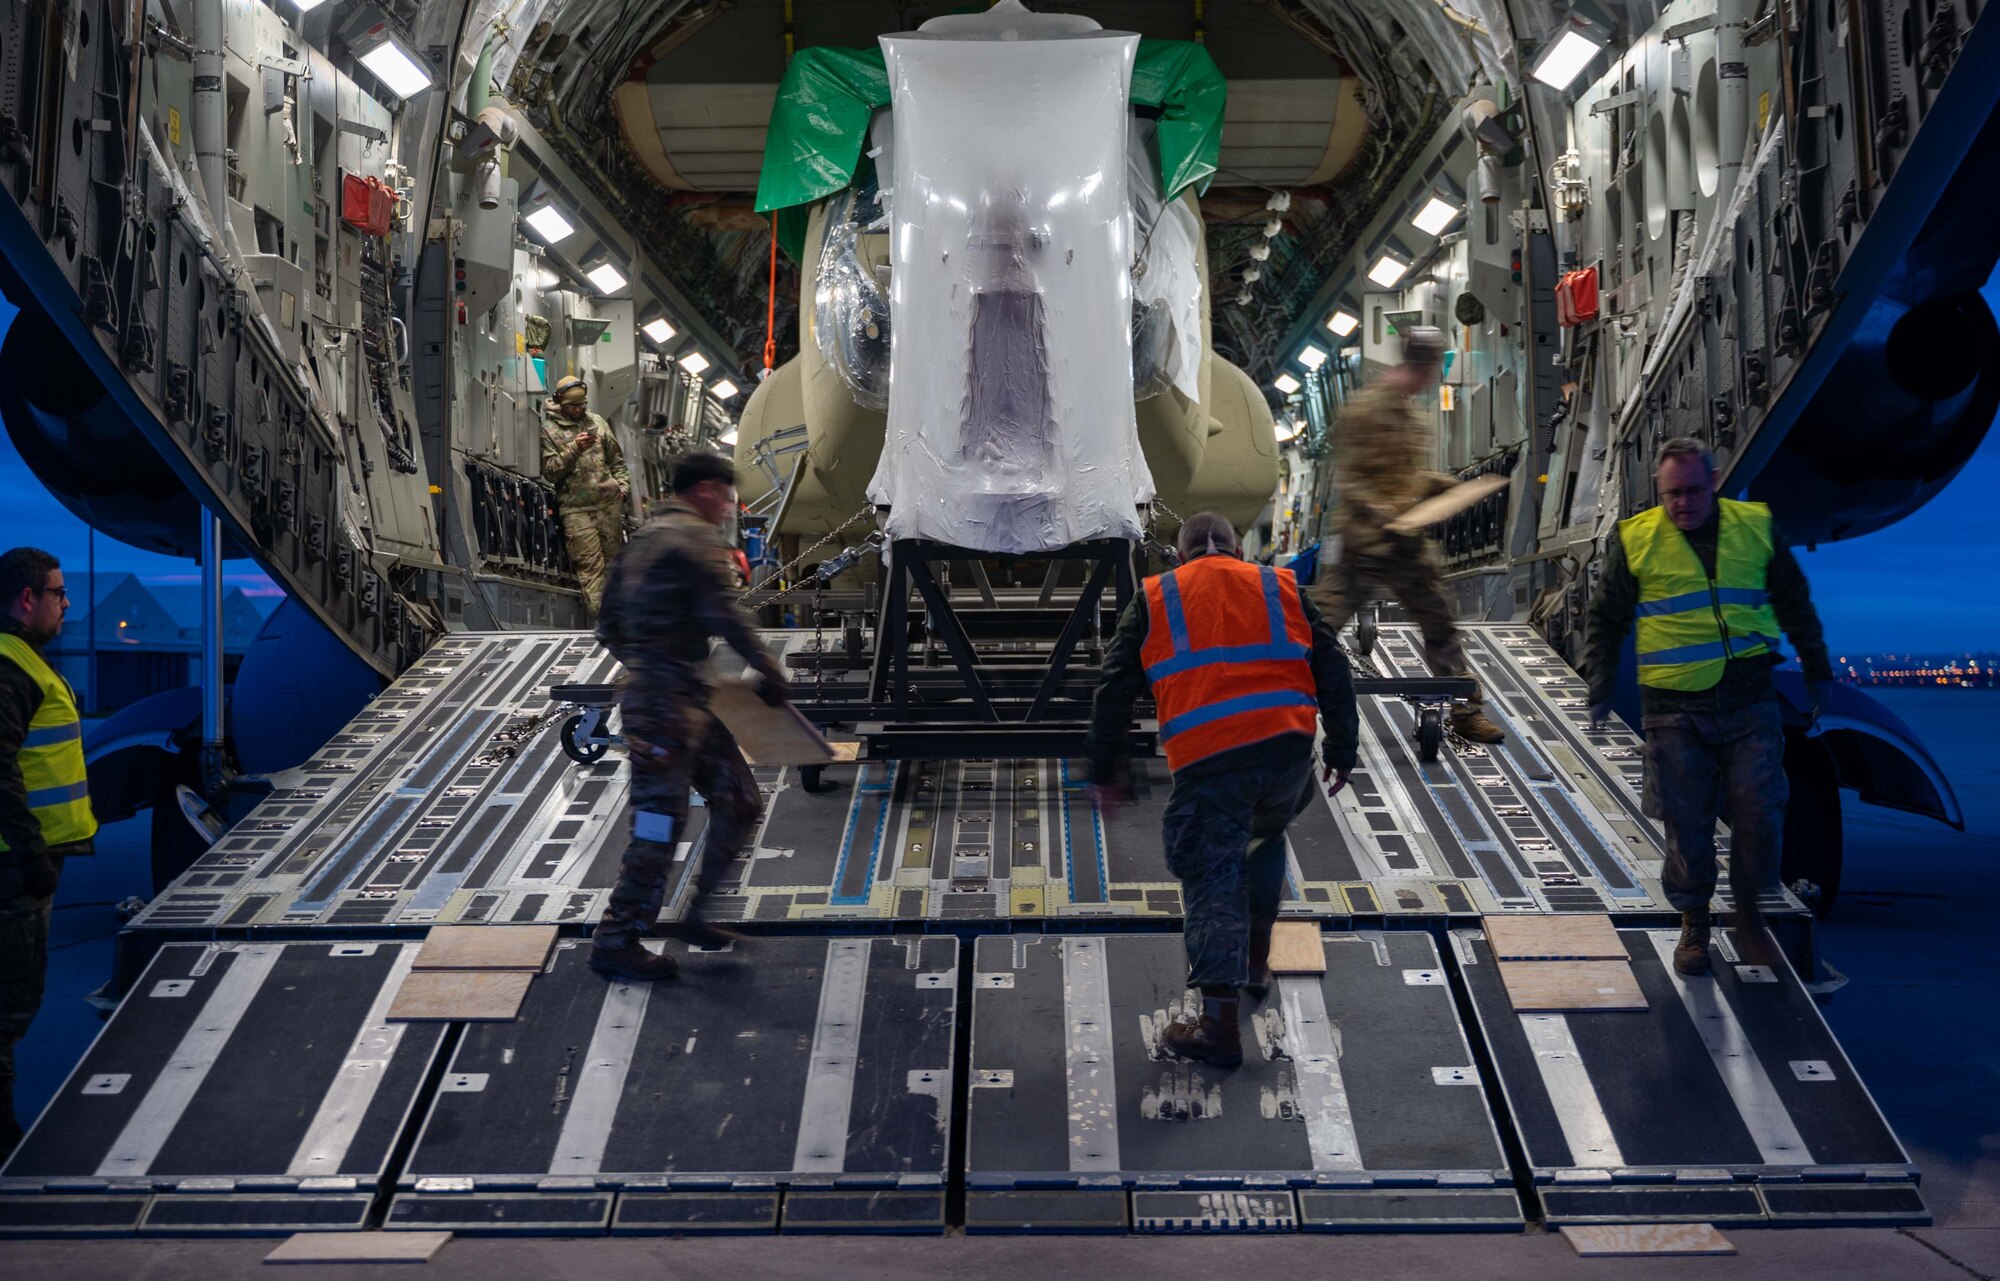 A CH-47F Chinook helicopter is unloaded from a C-17 Globemaster III assigned to Dover Air Force Base, Delaware, during a foreign military sales mission at Torrejón Air Base, Spain, Jan. 16, 2023. The United States and Spain recognize the central importance of the NATO alliance in ensuring transatlantic peace and security. As NATO allies for 40 years, the U.S. and Spain are steadfastly committed to providing NATO with ready forces and capabilities, strengthening transatlantic ties. (U.S. Air Force photo by Senior Airman Faith Barron)